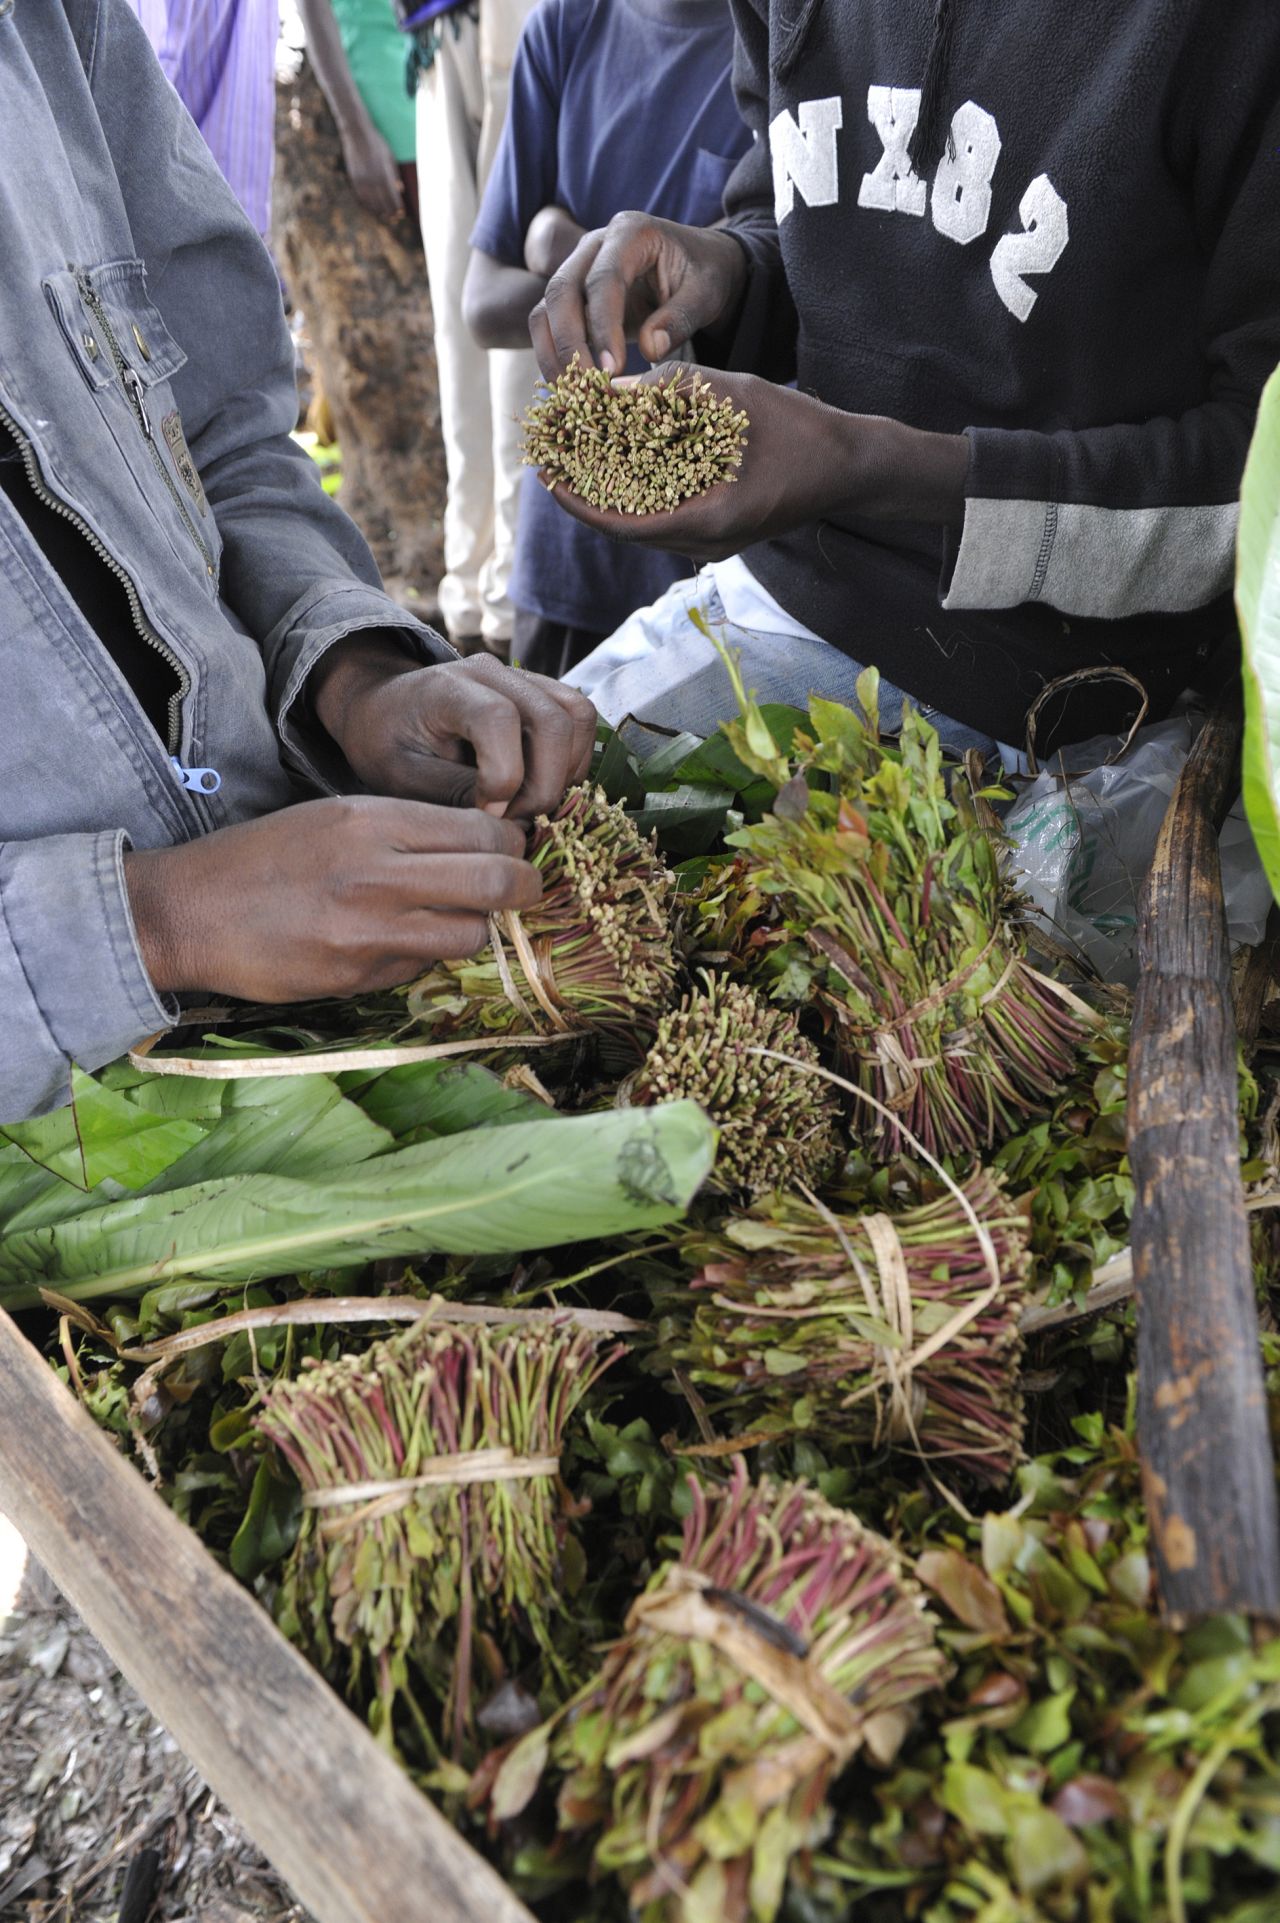 The Dutch government announced in January a ban on all imports of khat -- the mild narcotic is already illegal in the U.S. and most European countries.